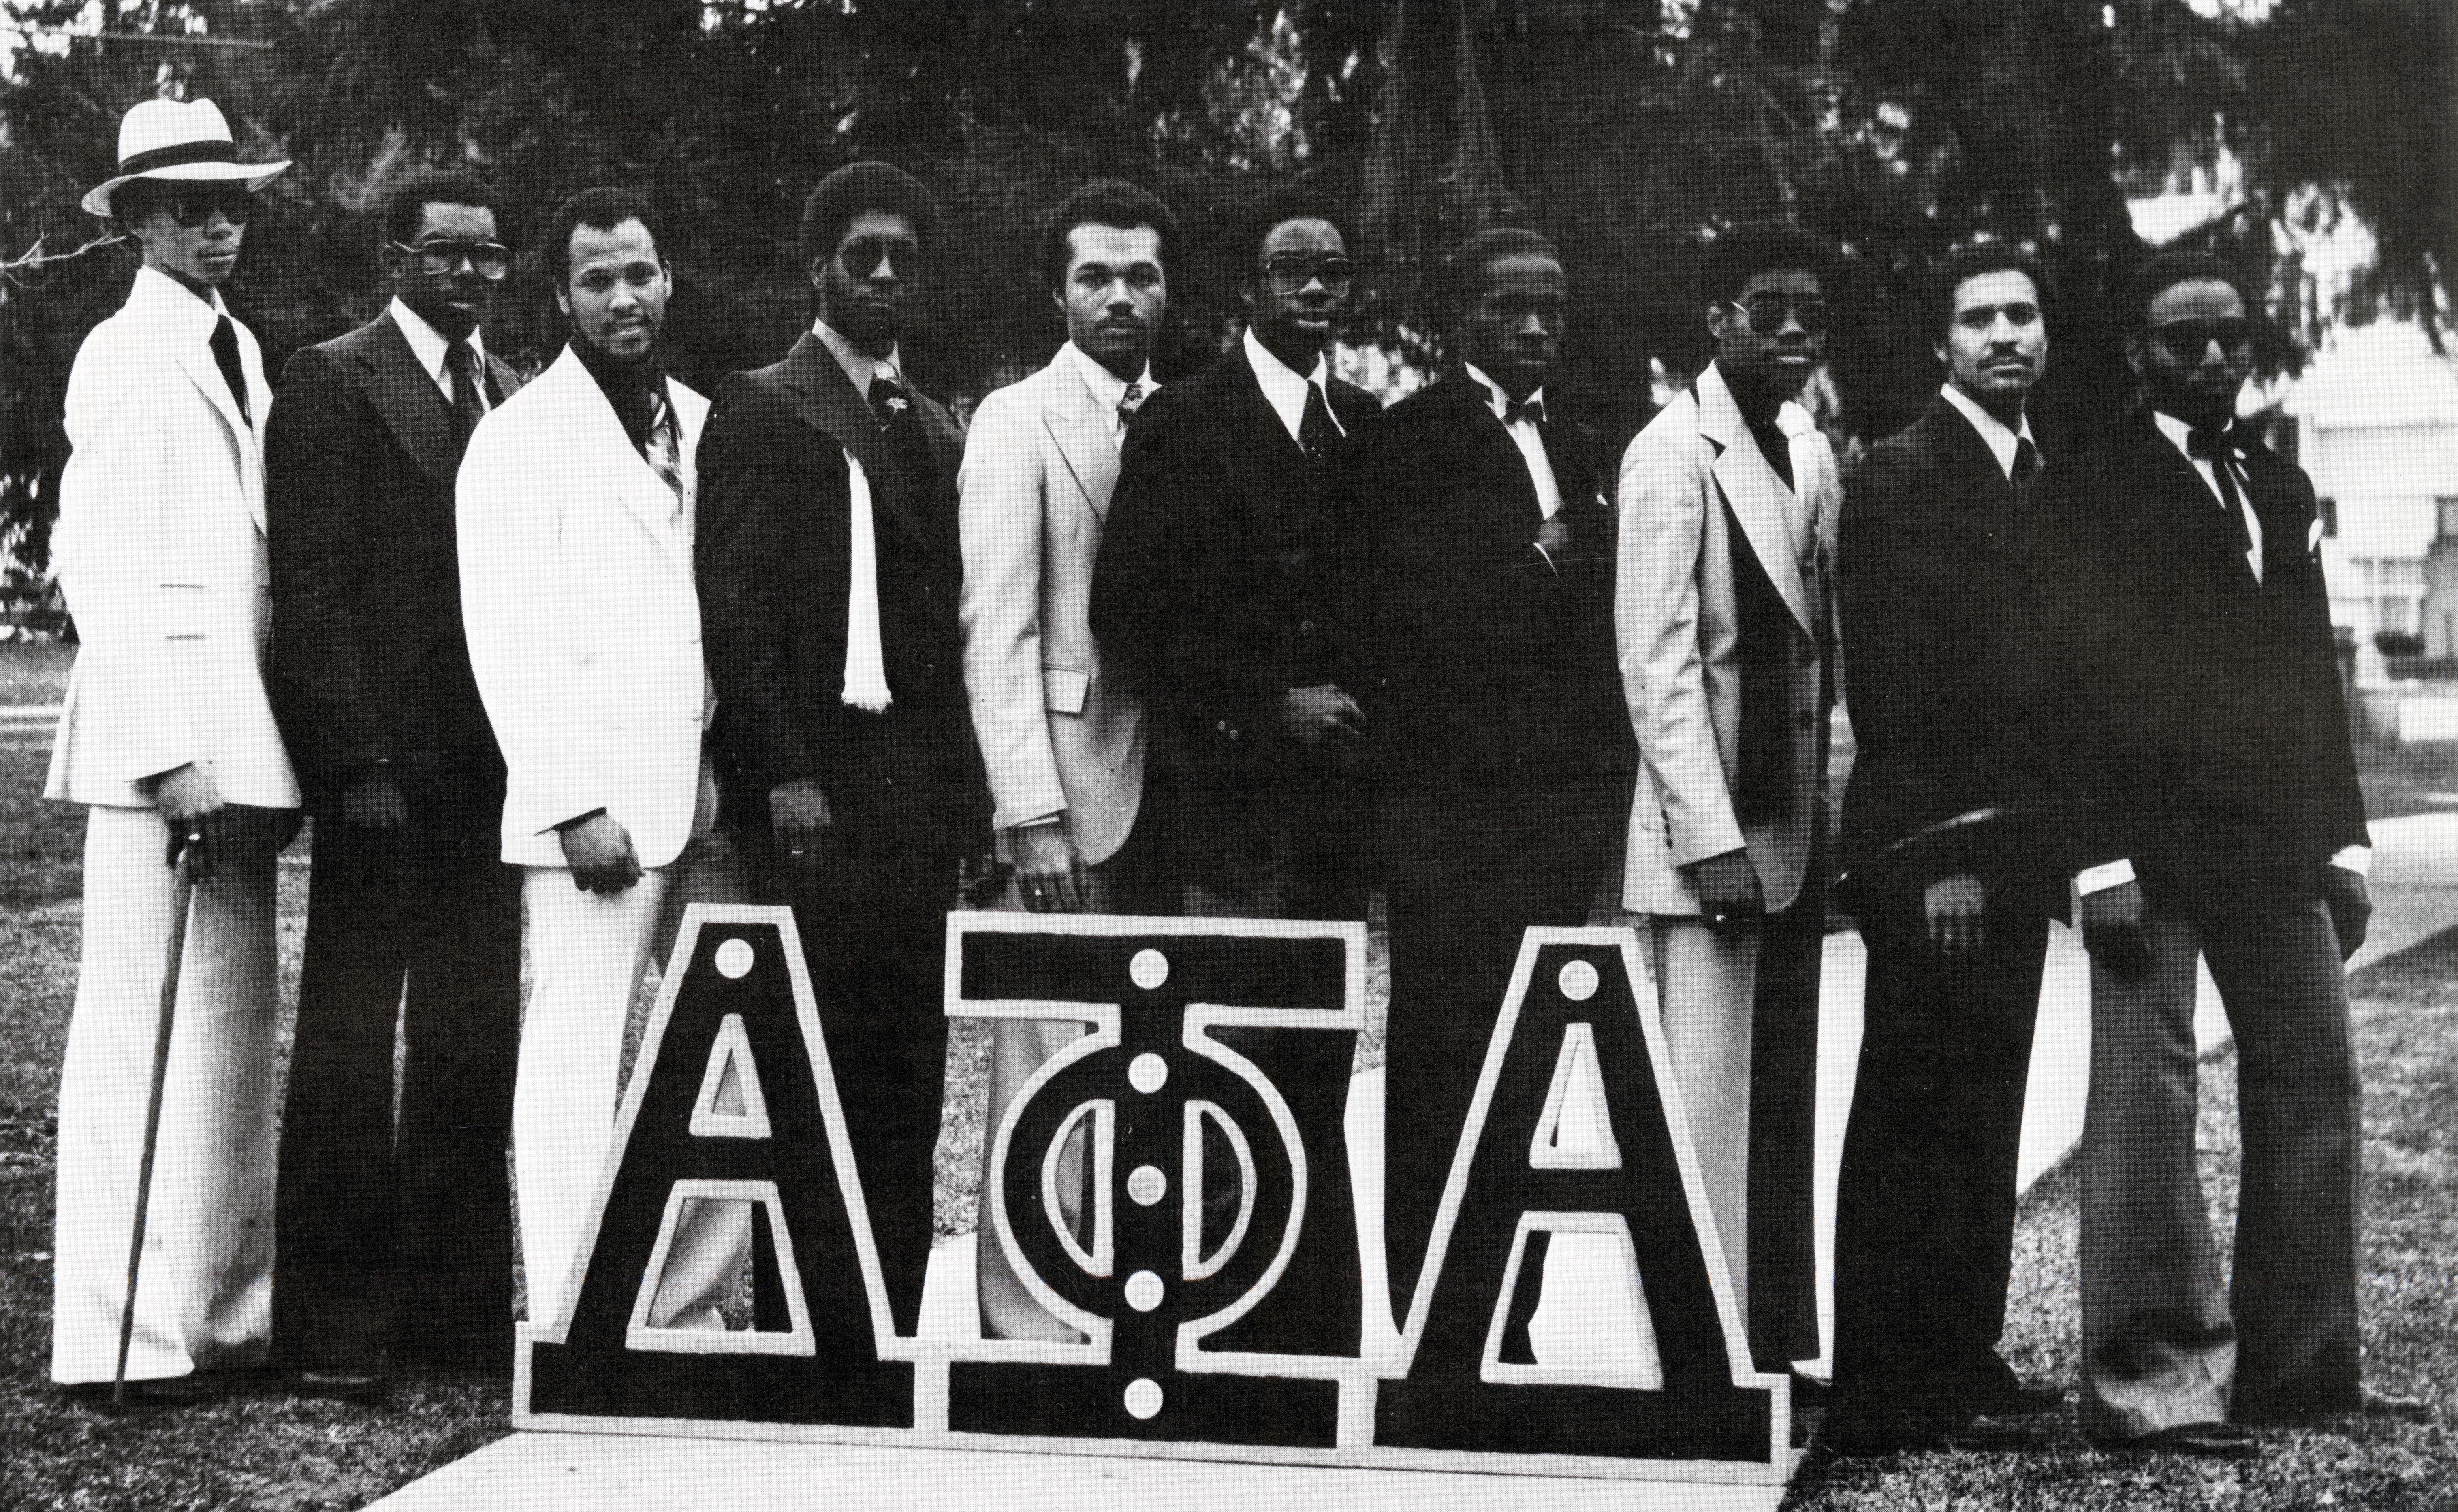 Black and white group photo of the brothers of the Alpha Phi Alpha fraternity at Dartmouth in 1979. All men pictured are wearing suits and standing behind a sign on the ground showing the letters of the fraternity.